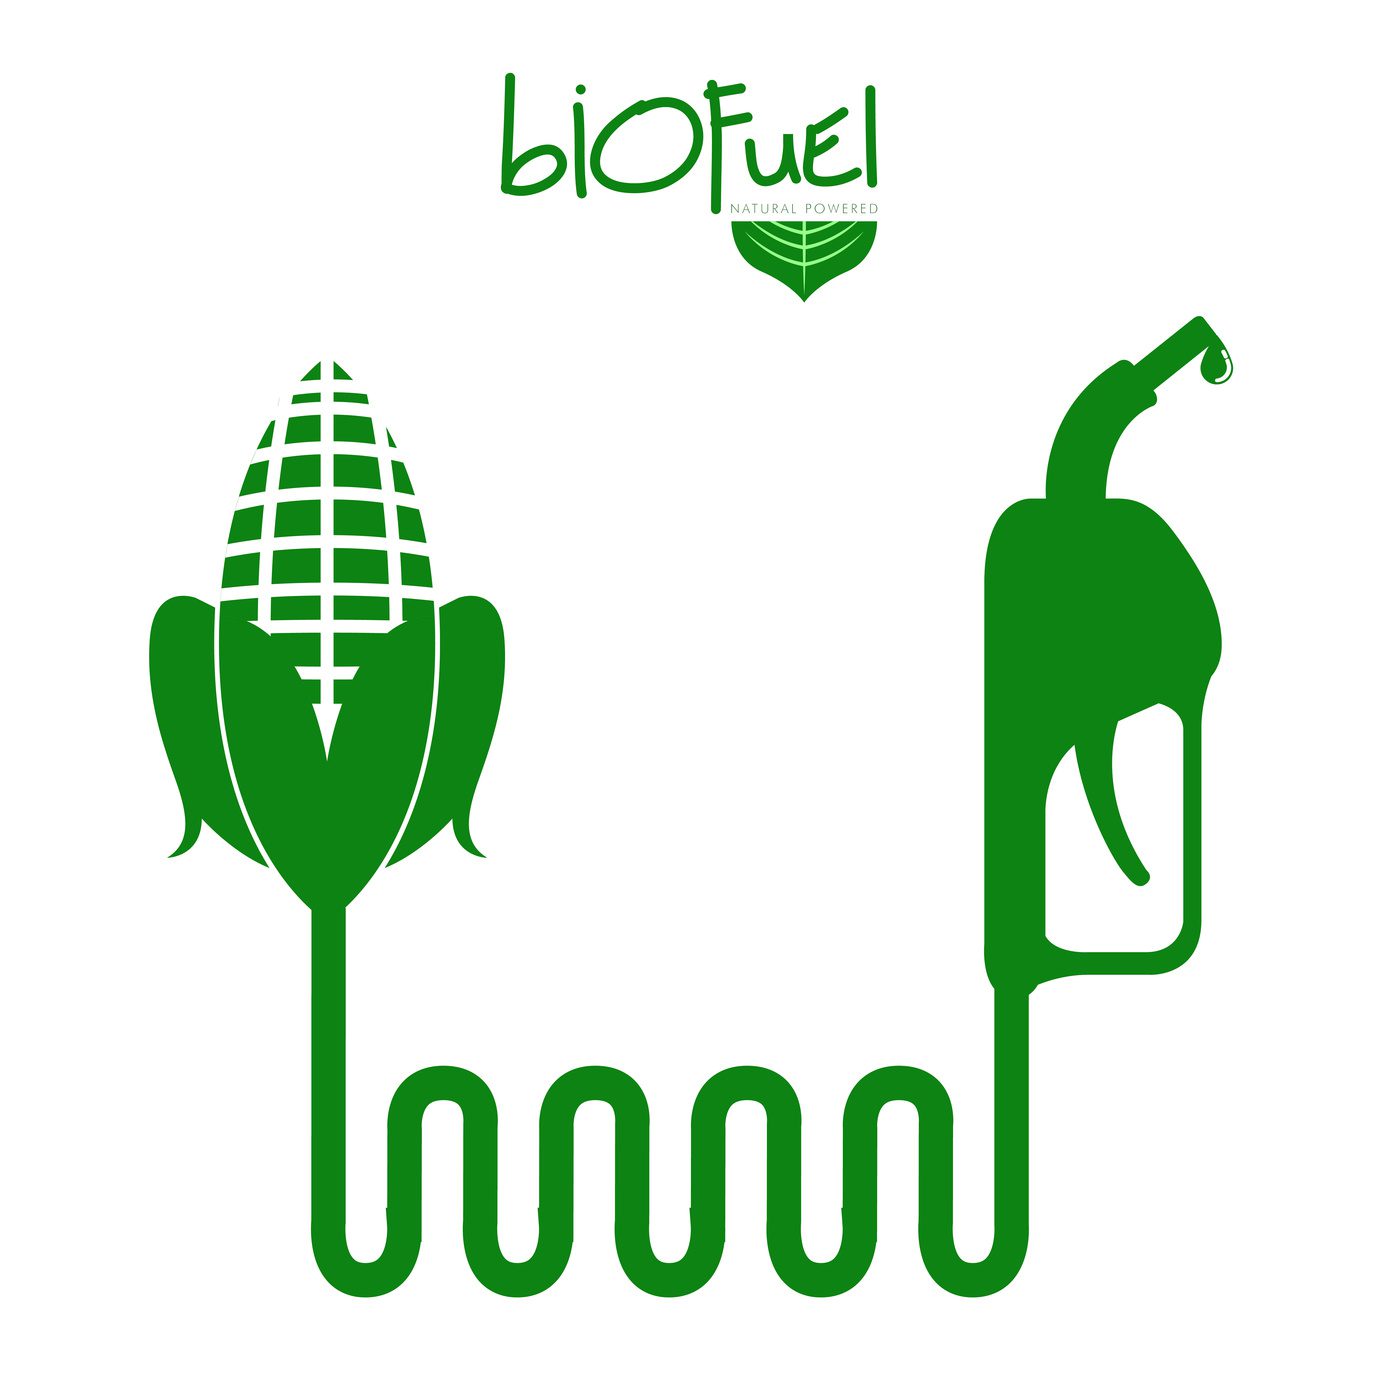 Biofuels: From Crest to Trough?